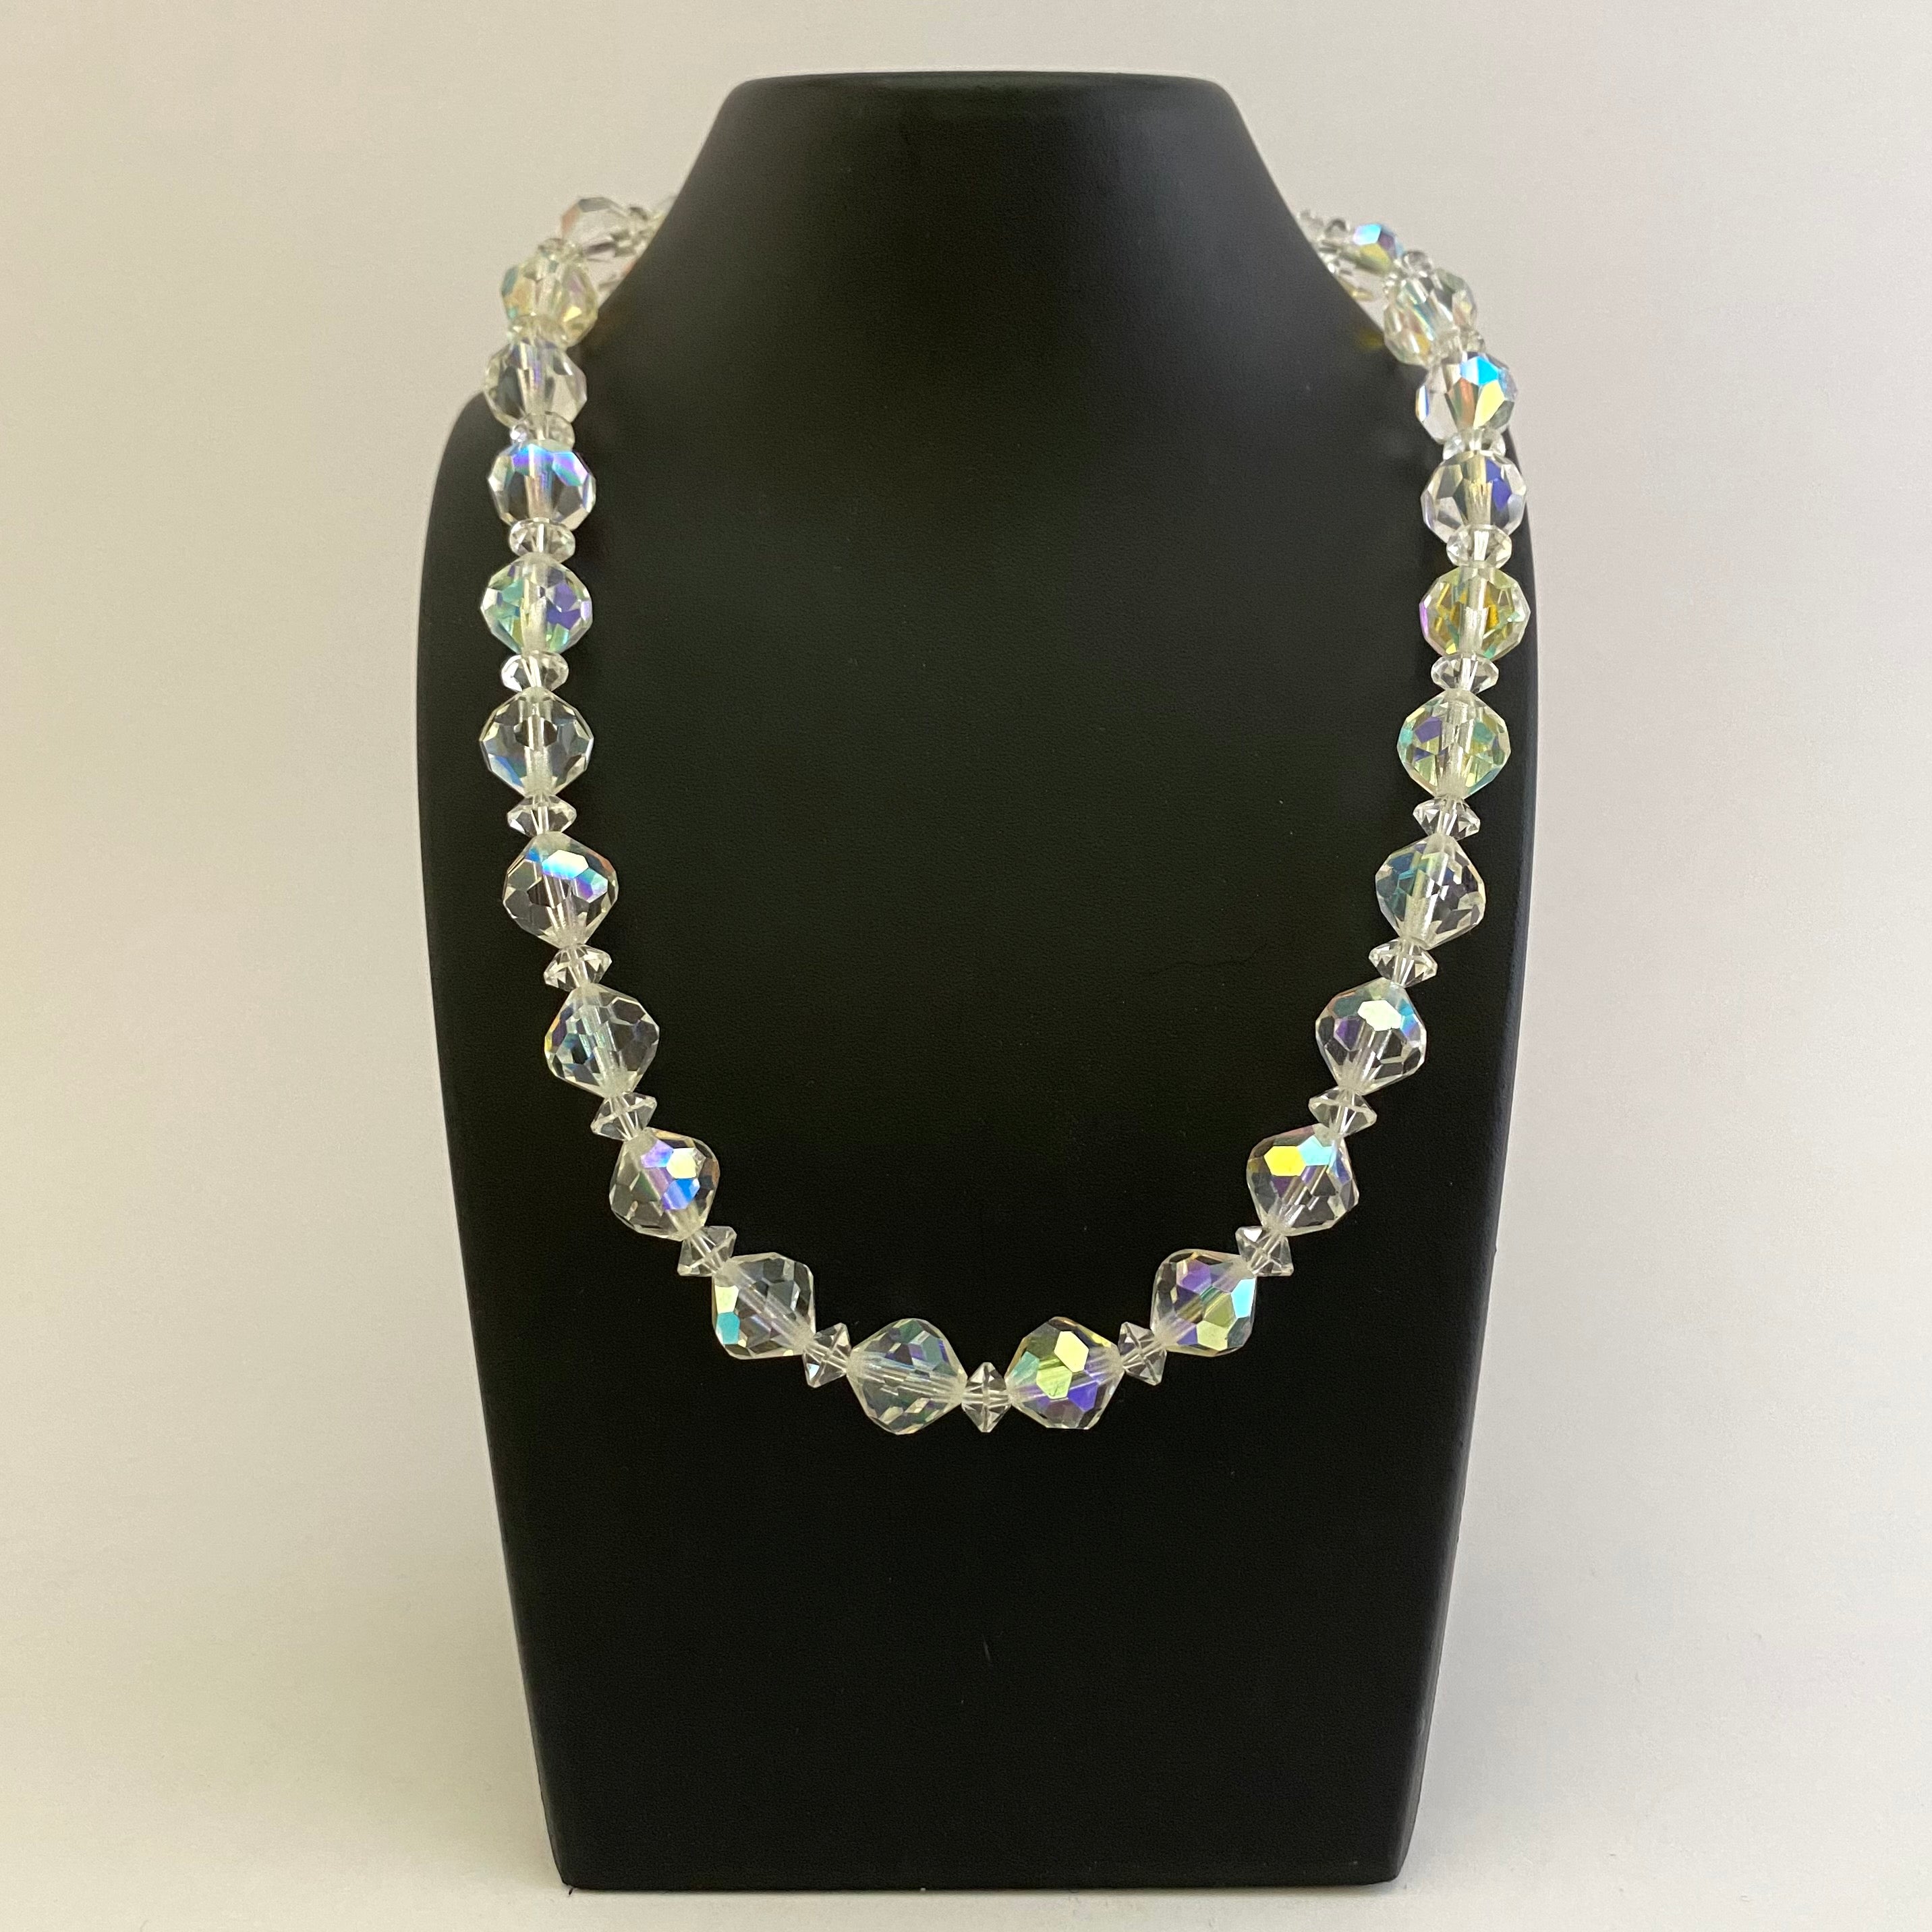 Gorgeous Vintage Necklace Aurora Borealis Rhinestone with Faceted Black  Crystal Drops - The Jewelry Stylist